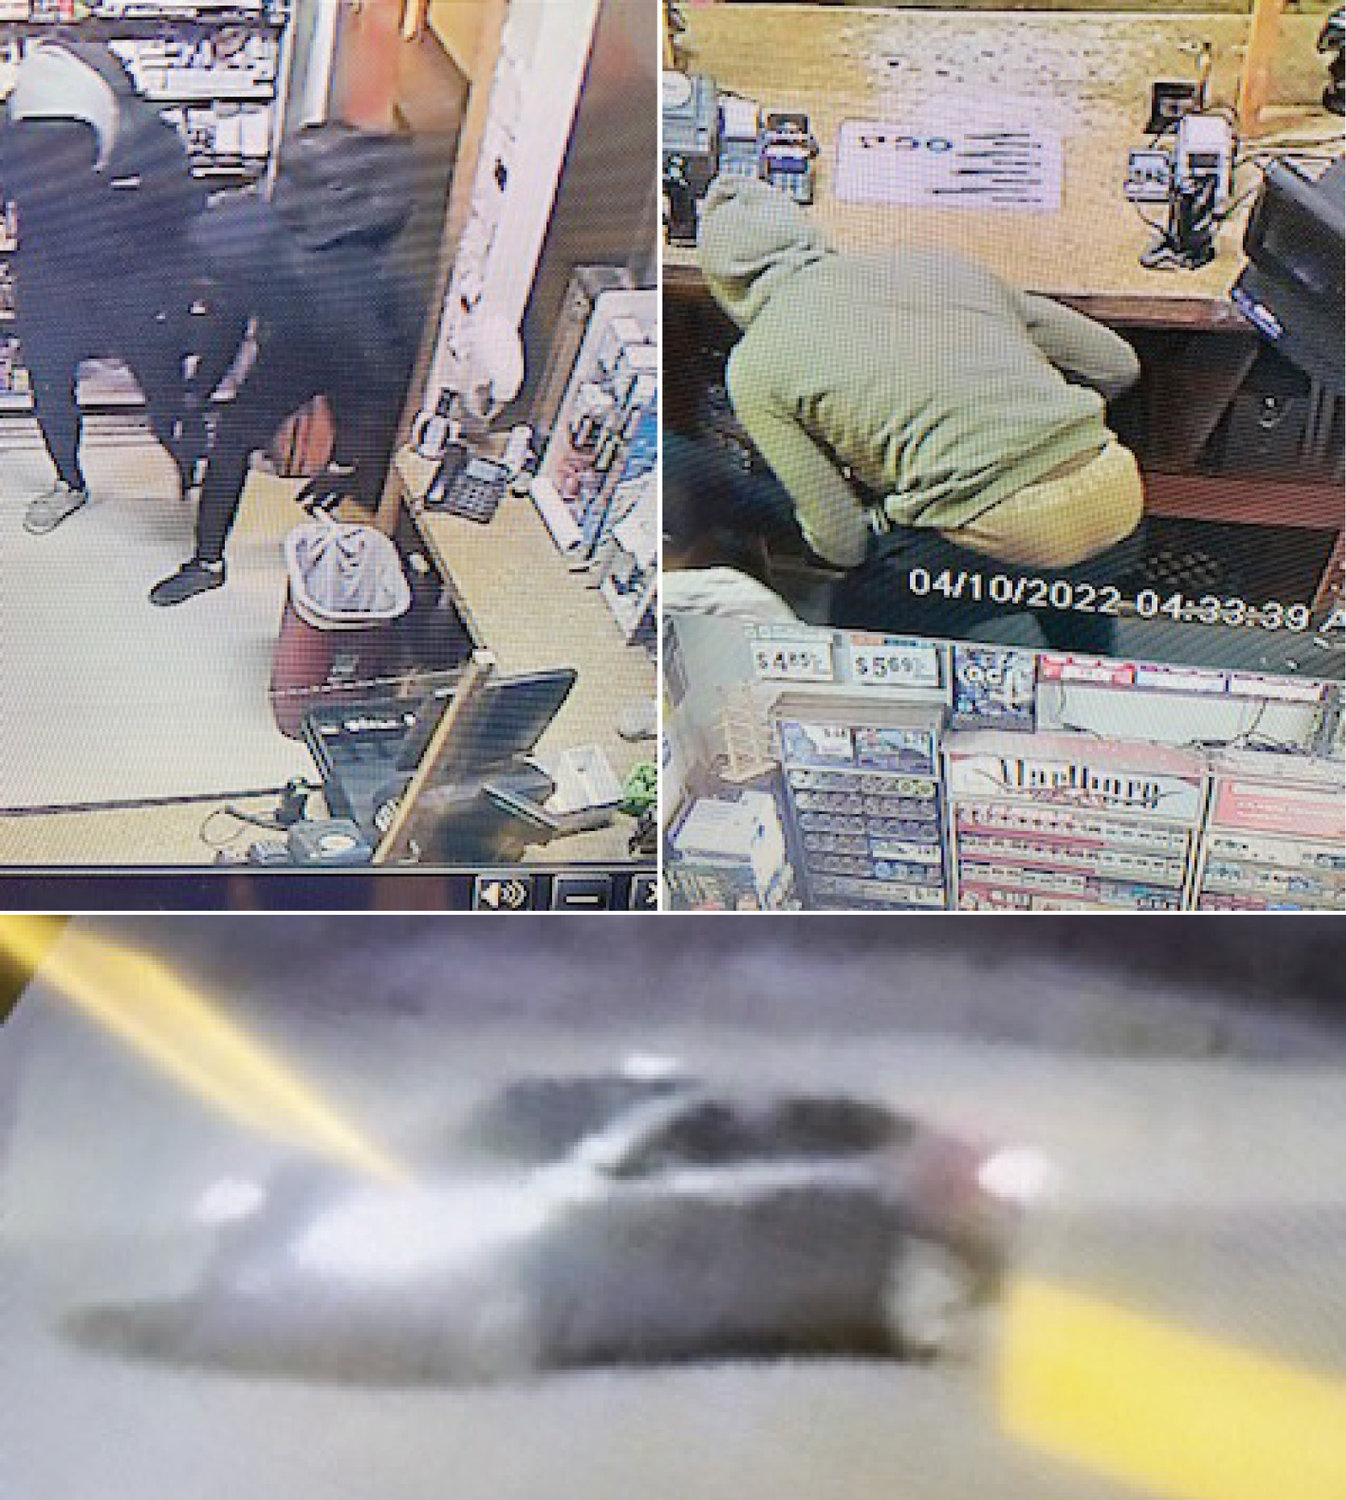 Both McClain County and Purcell Police are investigating burglaries in Purcell, Dibble and Washington. Surveillance video shows people inside the businesses and the get-away vehicle.